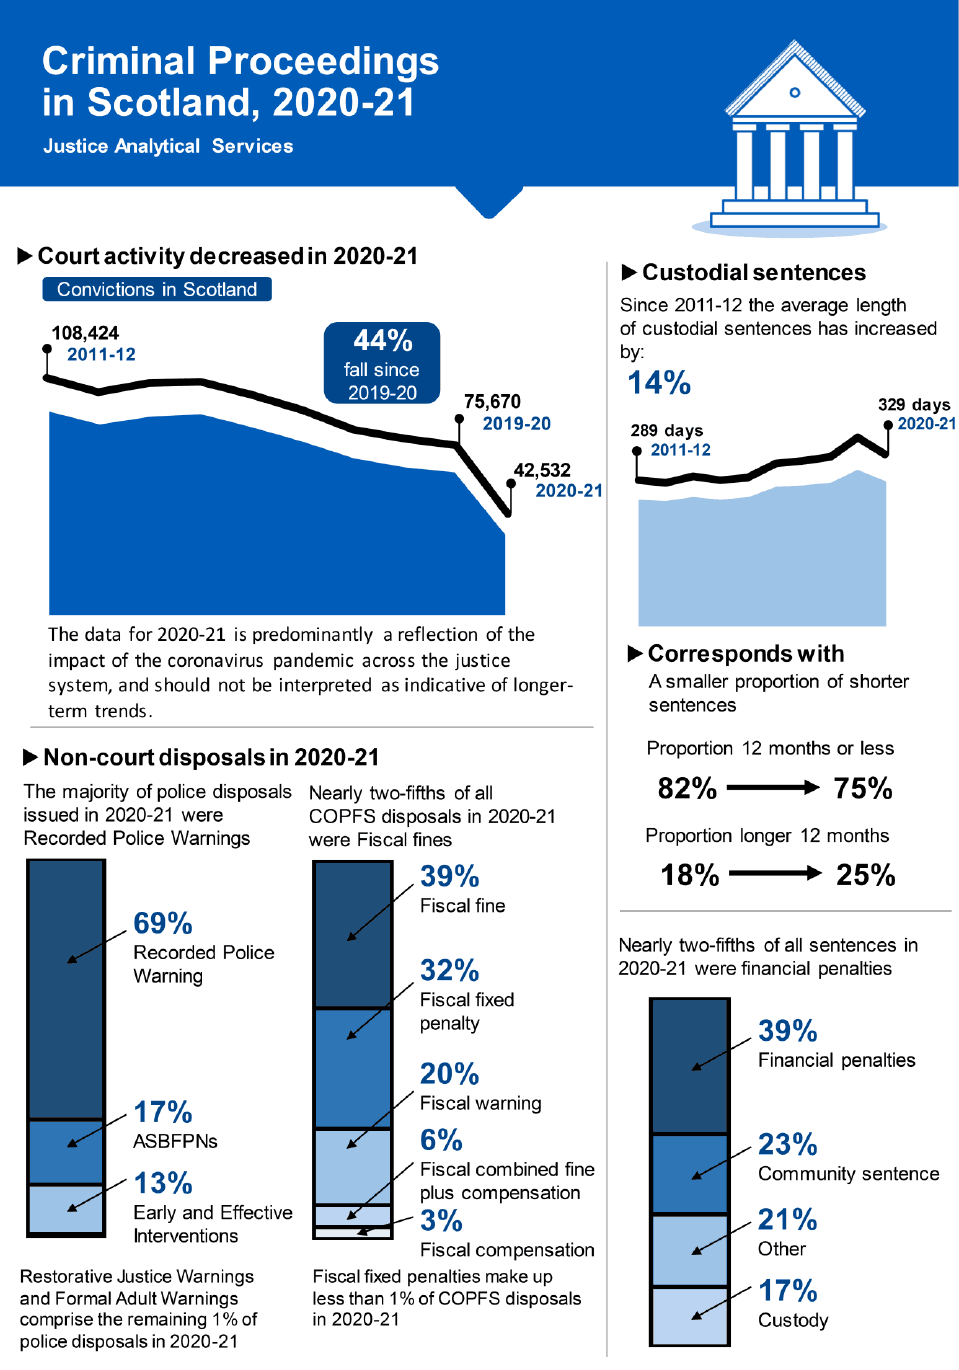 An infographic with charts showing the headline trends in criminal proceedings in Scotland for the period 2011-12 to 2020-21.